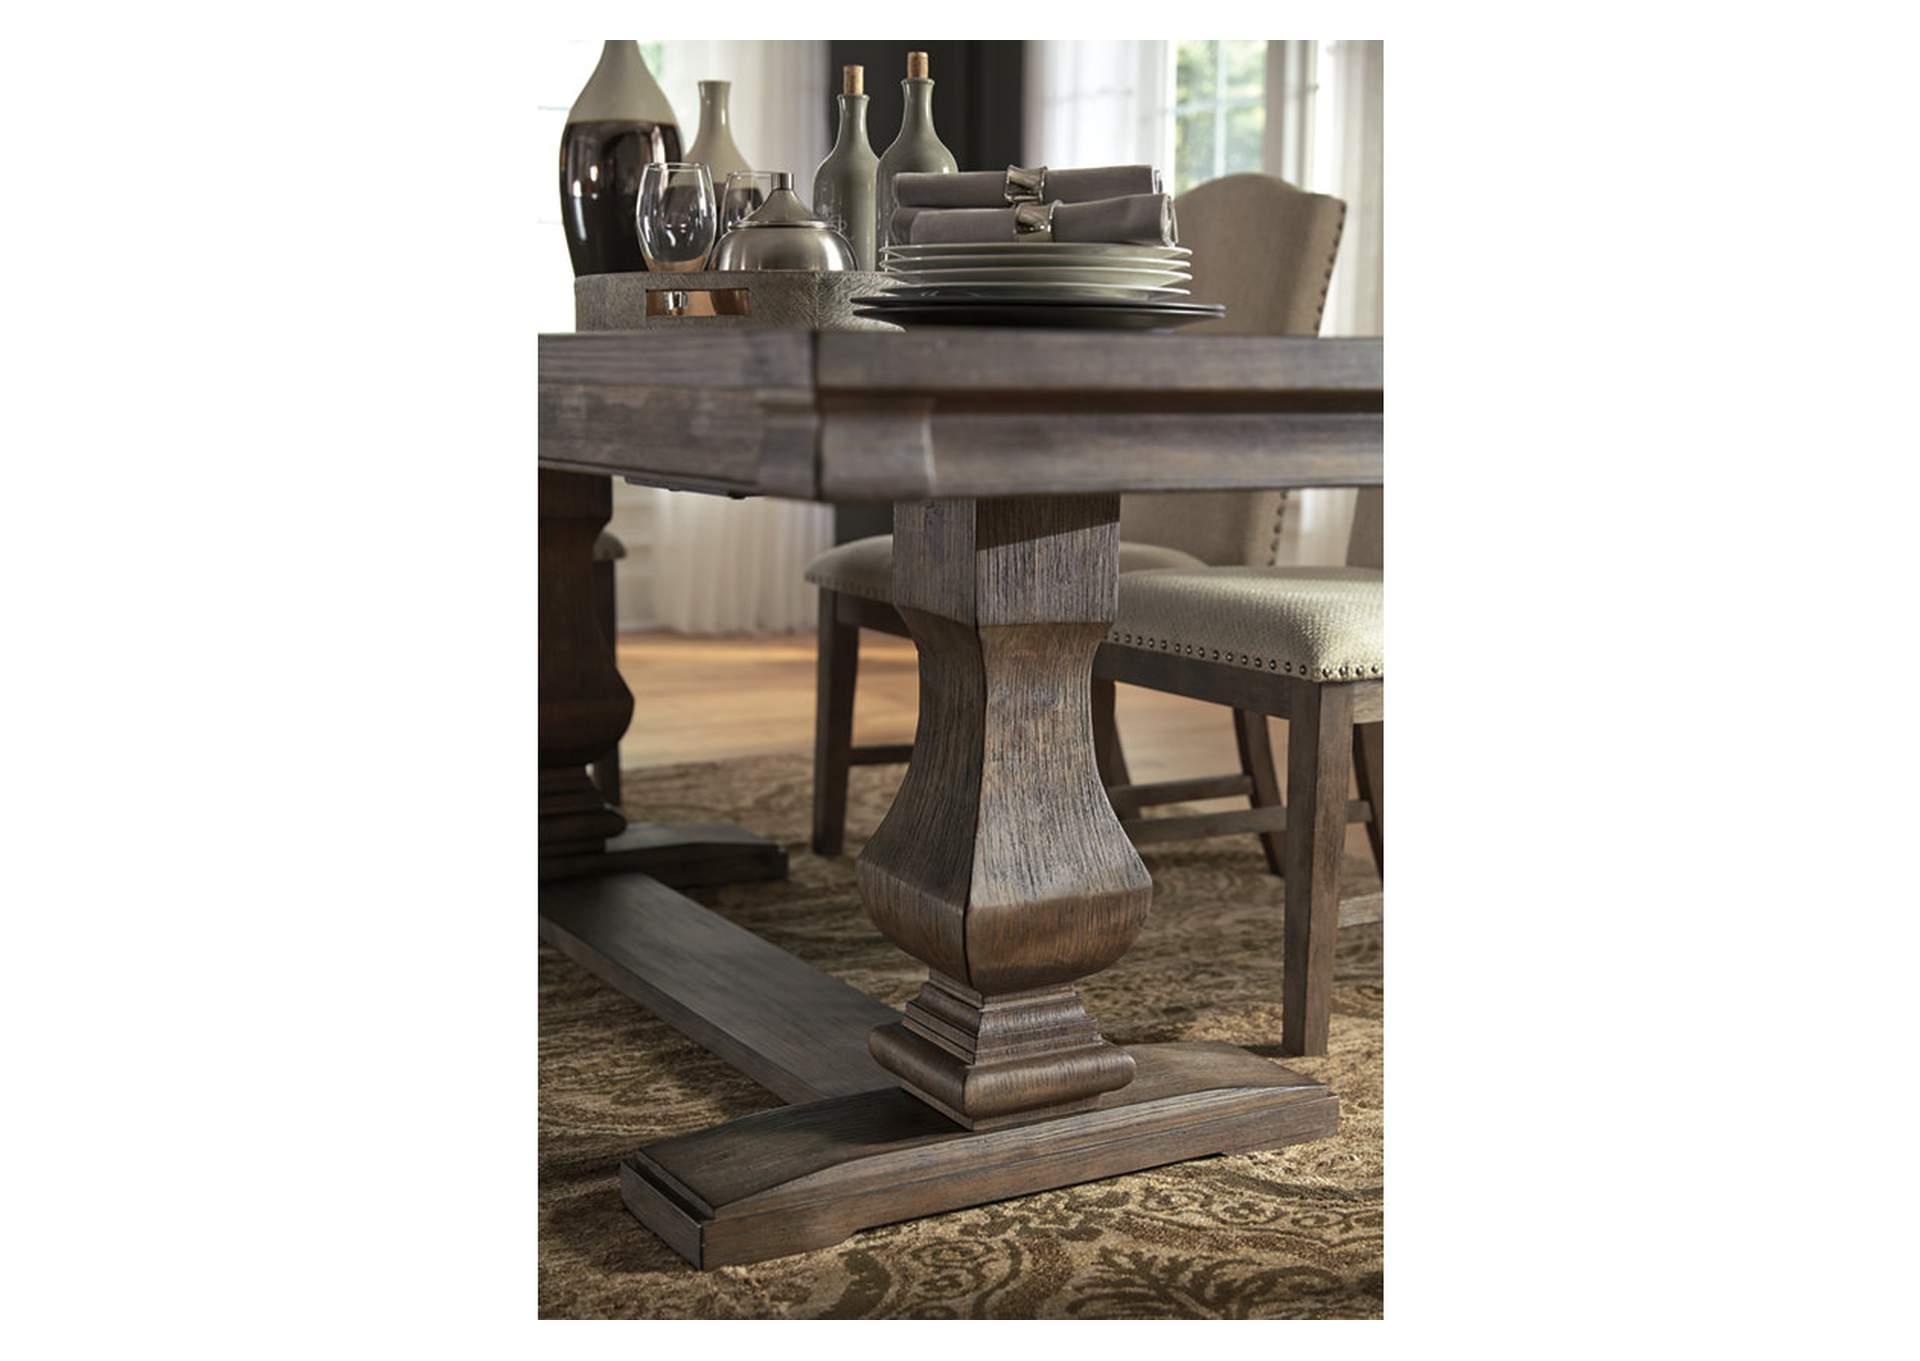 Johnelle Dining Table and 4 Chairs with Storage,Millennium